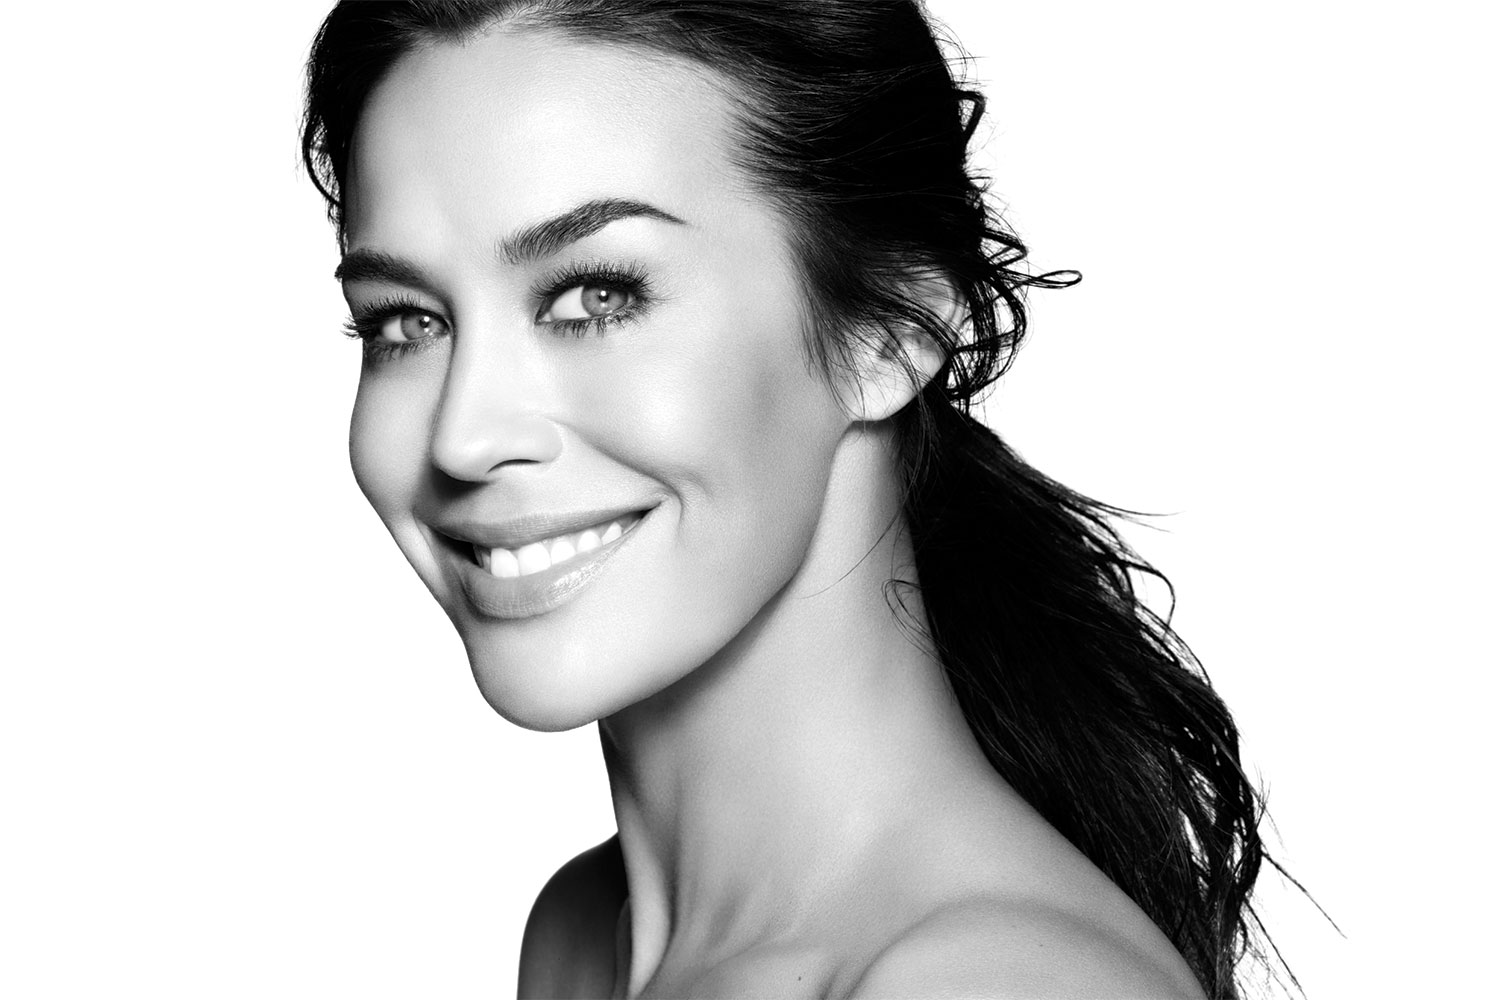 THE MODEL SERIES: MEGAN GALE - Gritty Pretty